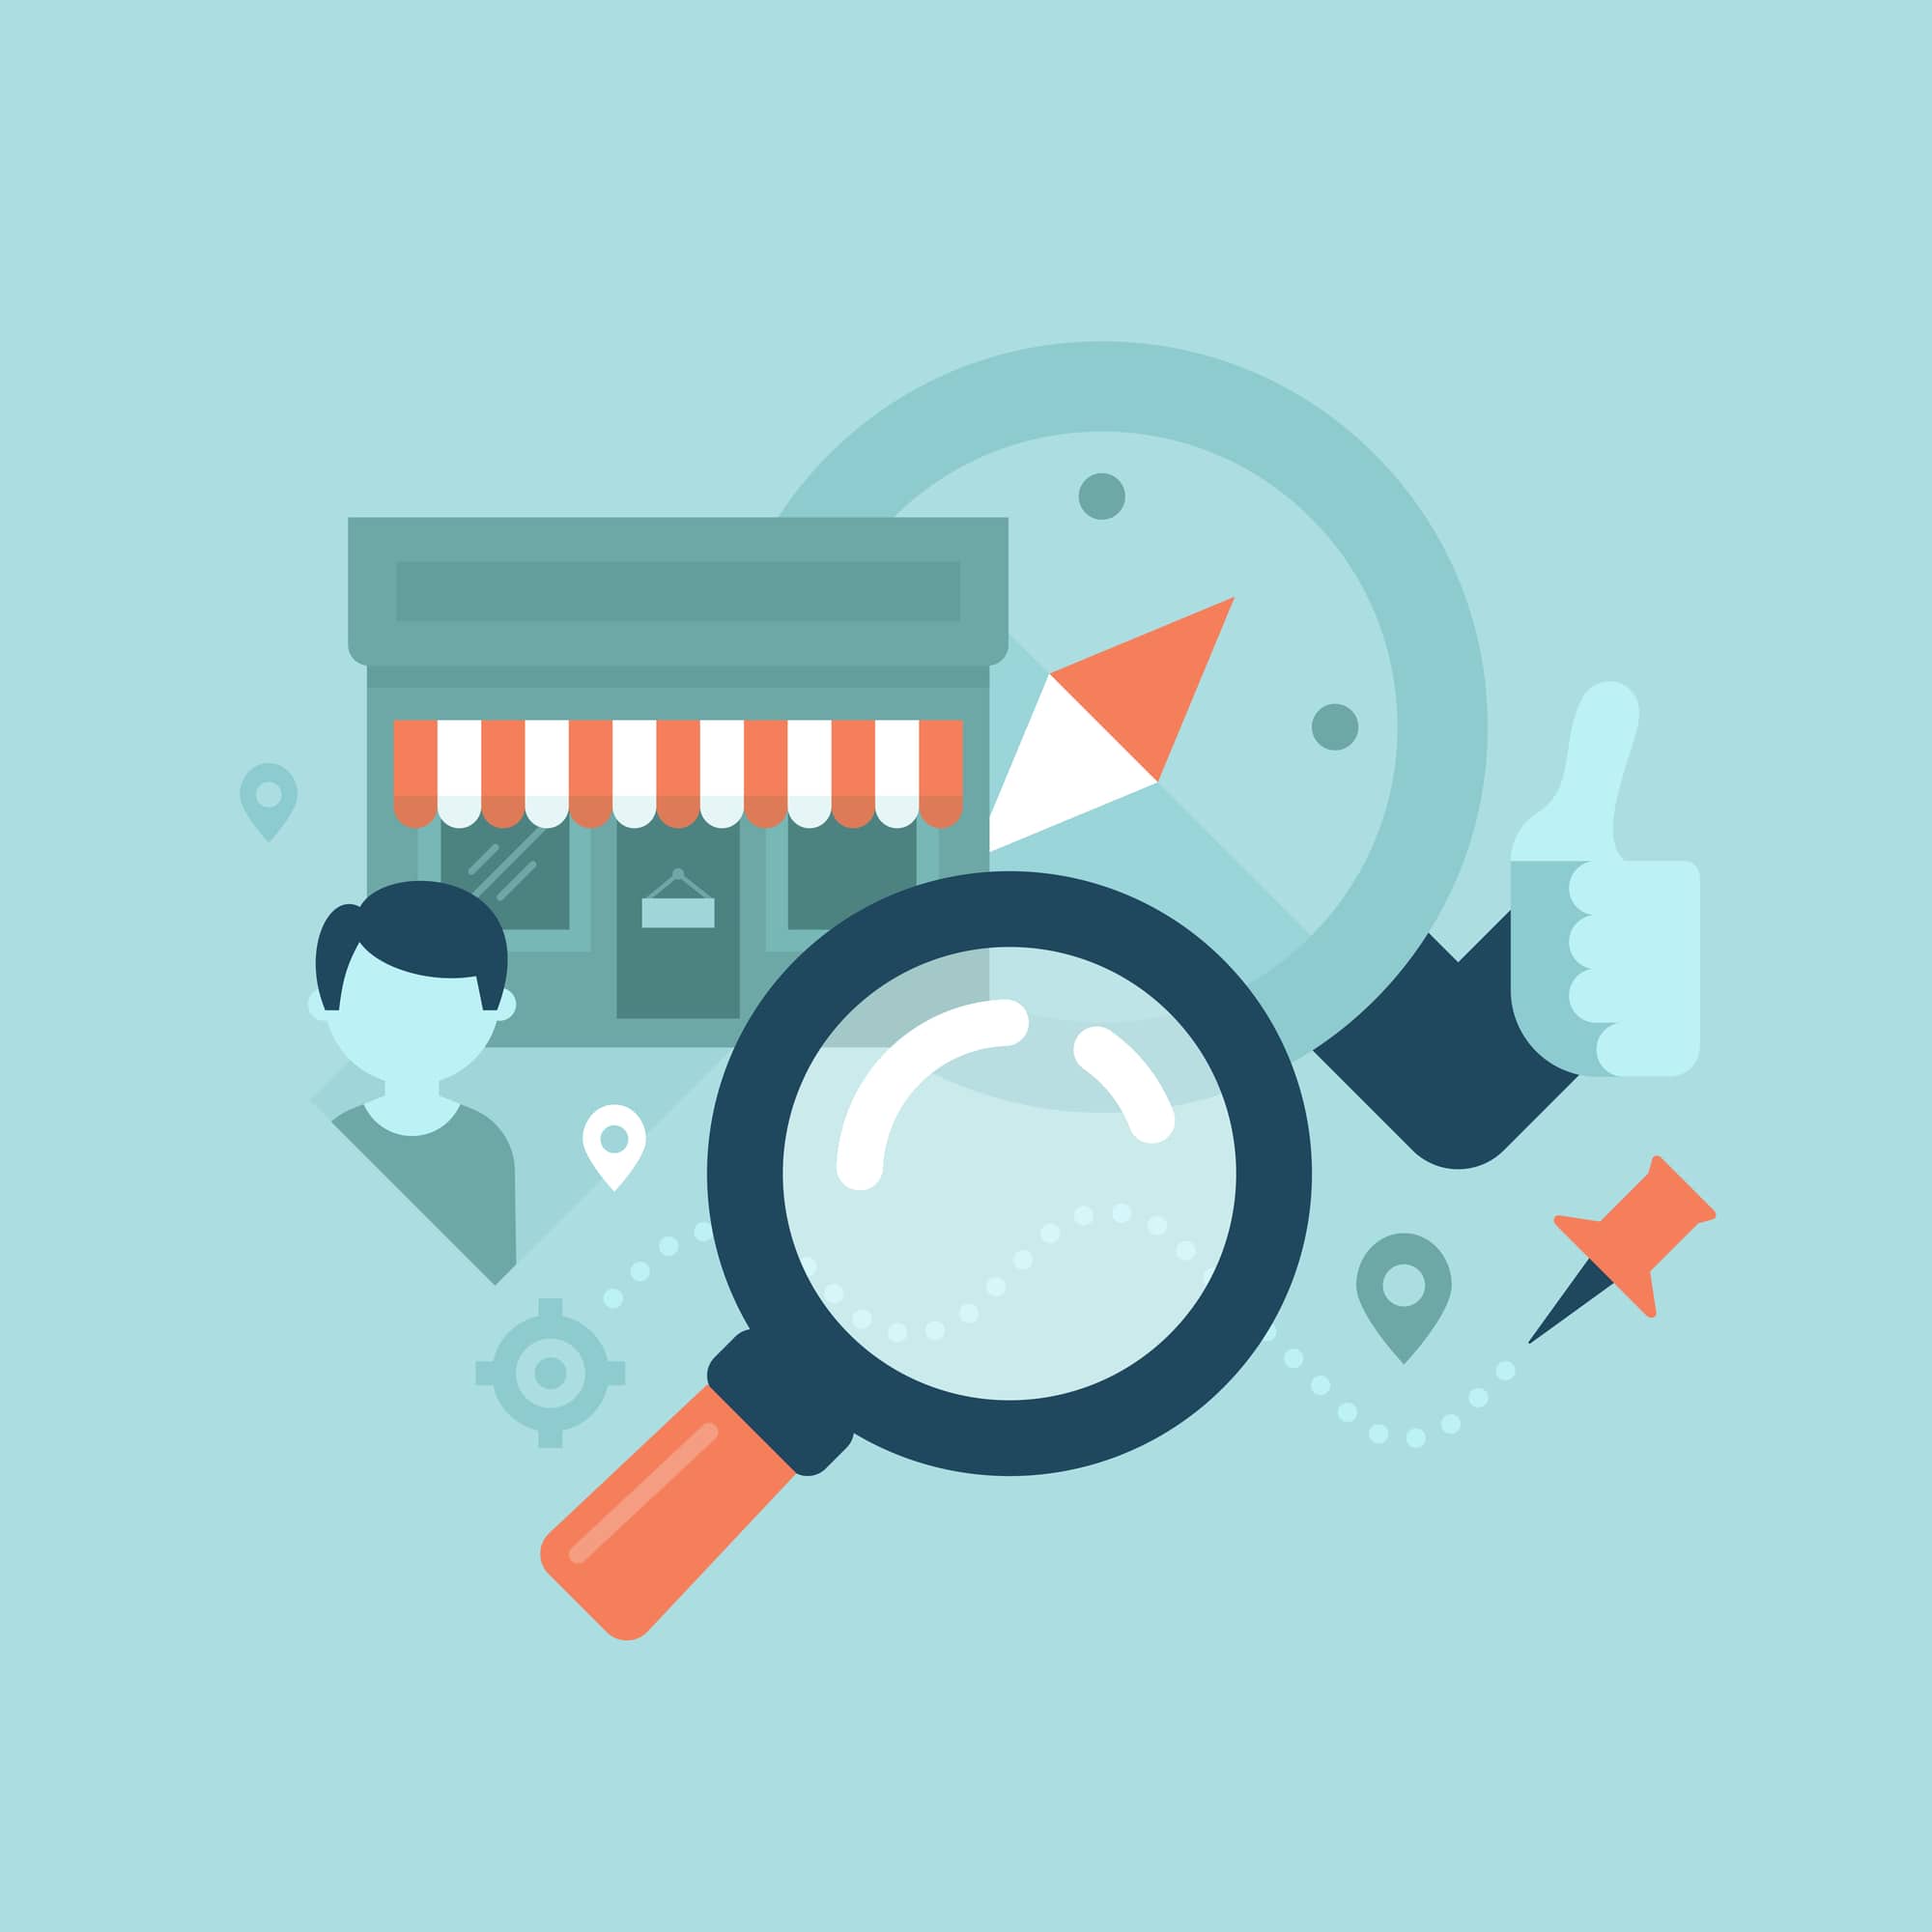 vector image of magnifying glass over a local brick-and-mortar business to symbolize the importance of local SEO for small business